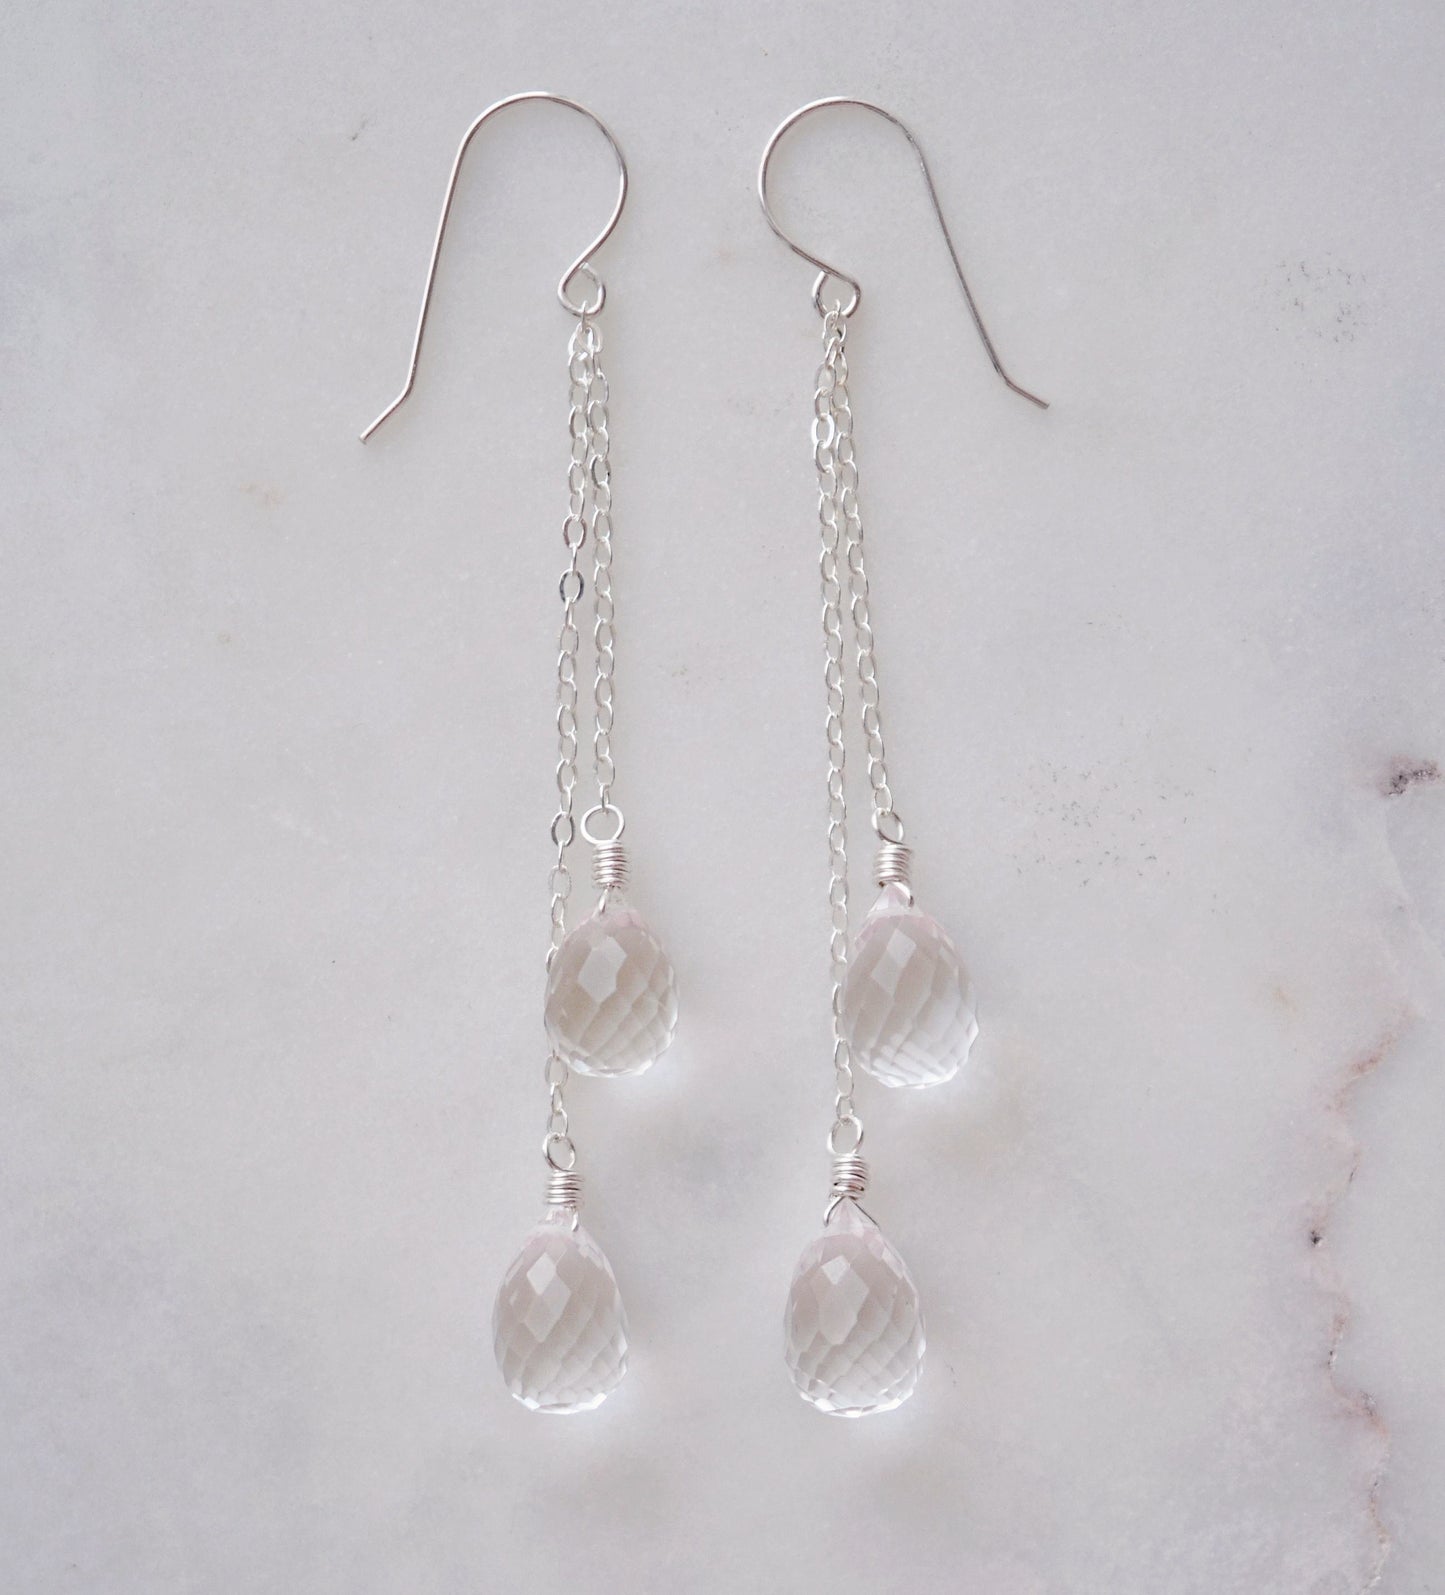 Long clear crystal quartz earrings with two teardrop dangles hanging from a dainty sterling silver chain.